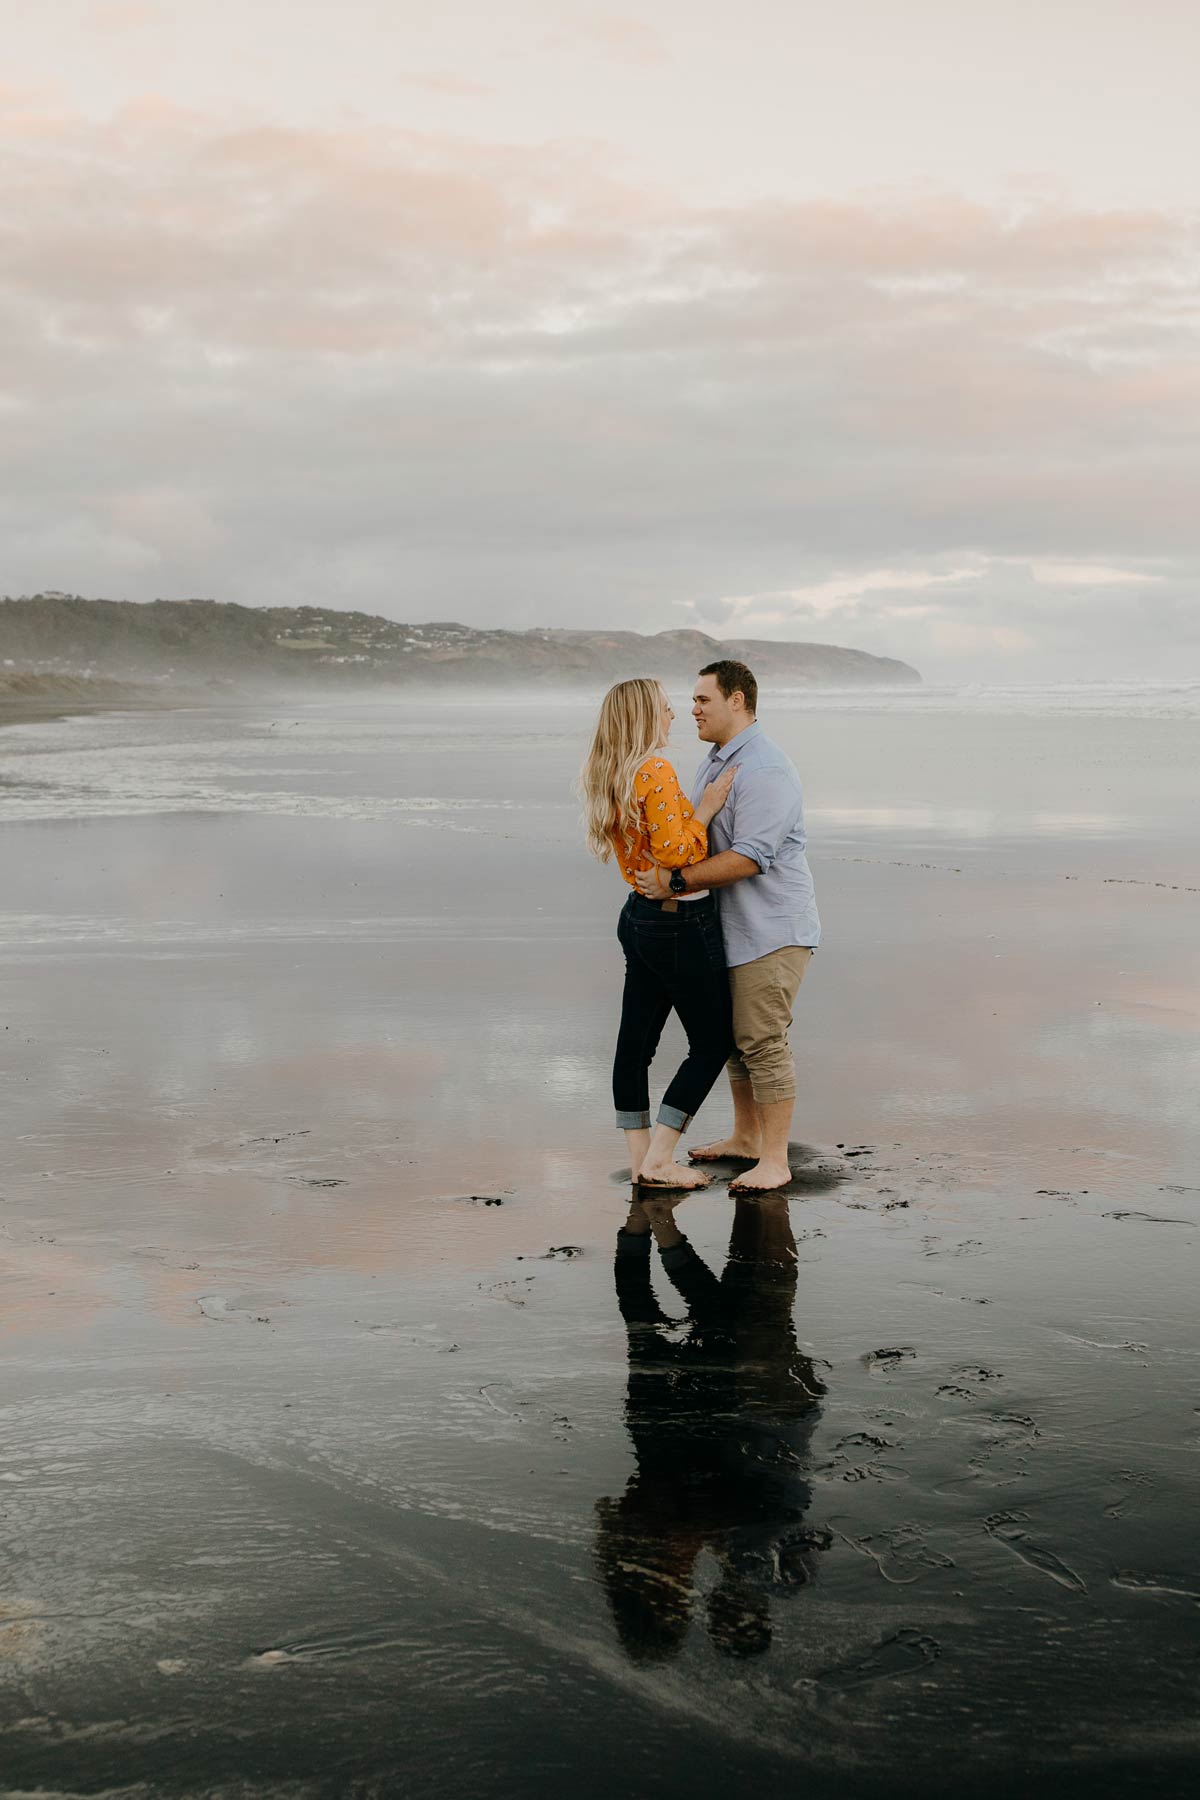 couple embracing with a wet sand reflection during a golden light evening lifestyle engagment pre-wedding photoshoot session at muriwai beach auckland new zealand photos by sarah weber photography